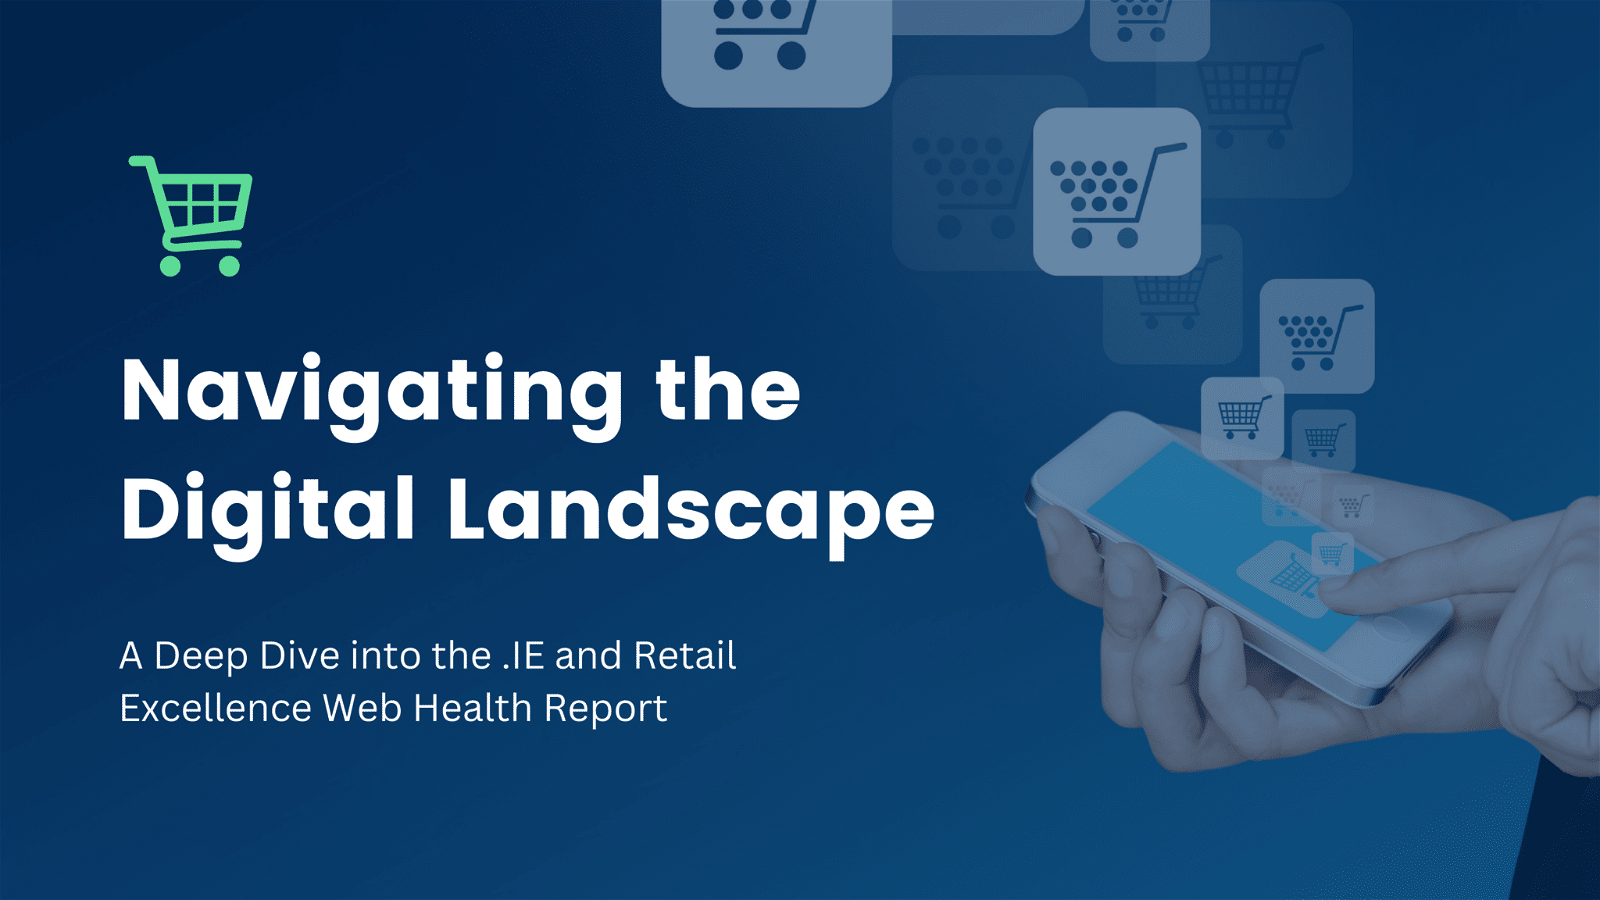 The image is showing a presentation about navigating the digital landscape and exploring the .IE and Retail Excellence Web Health Report.